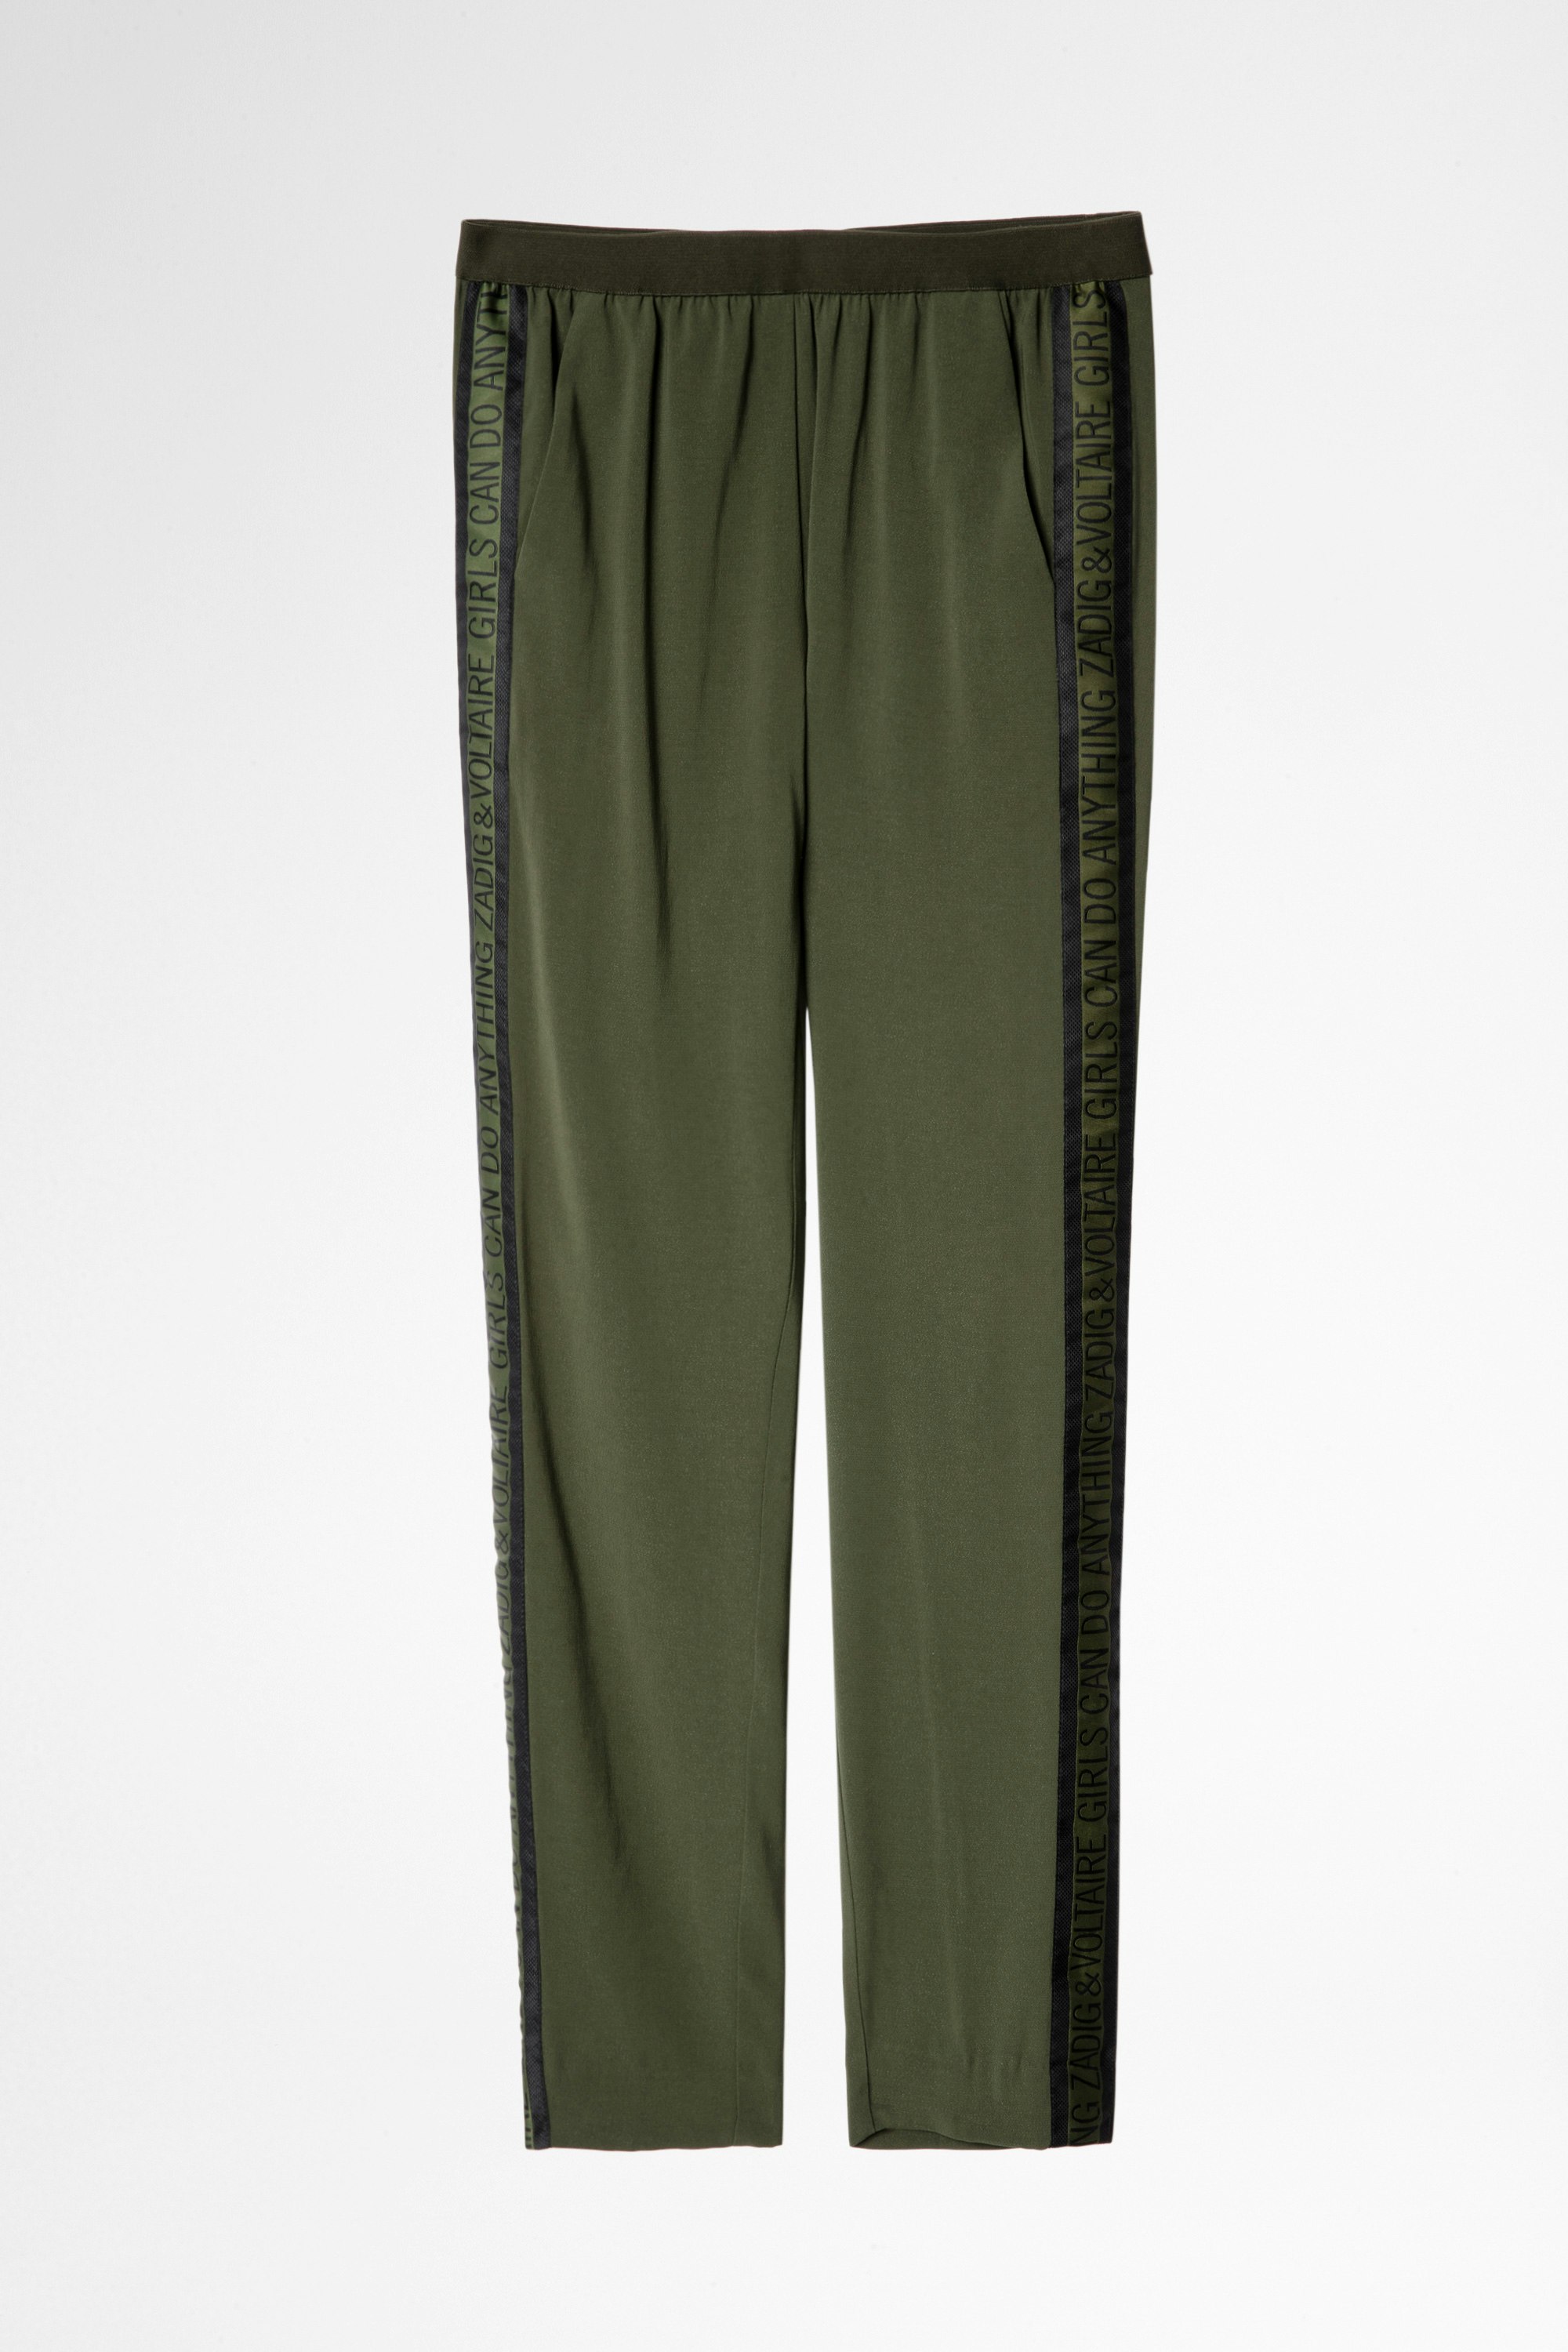 Paula Trousers Women’s khaki trousers with bands on the sides